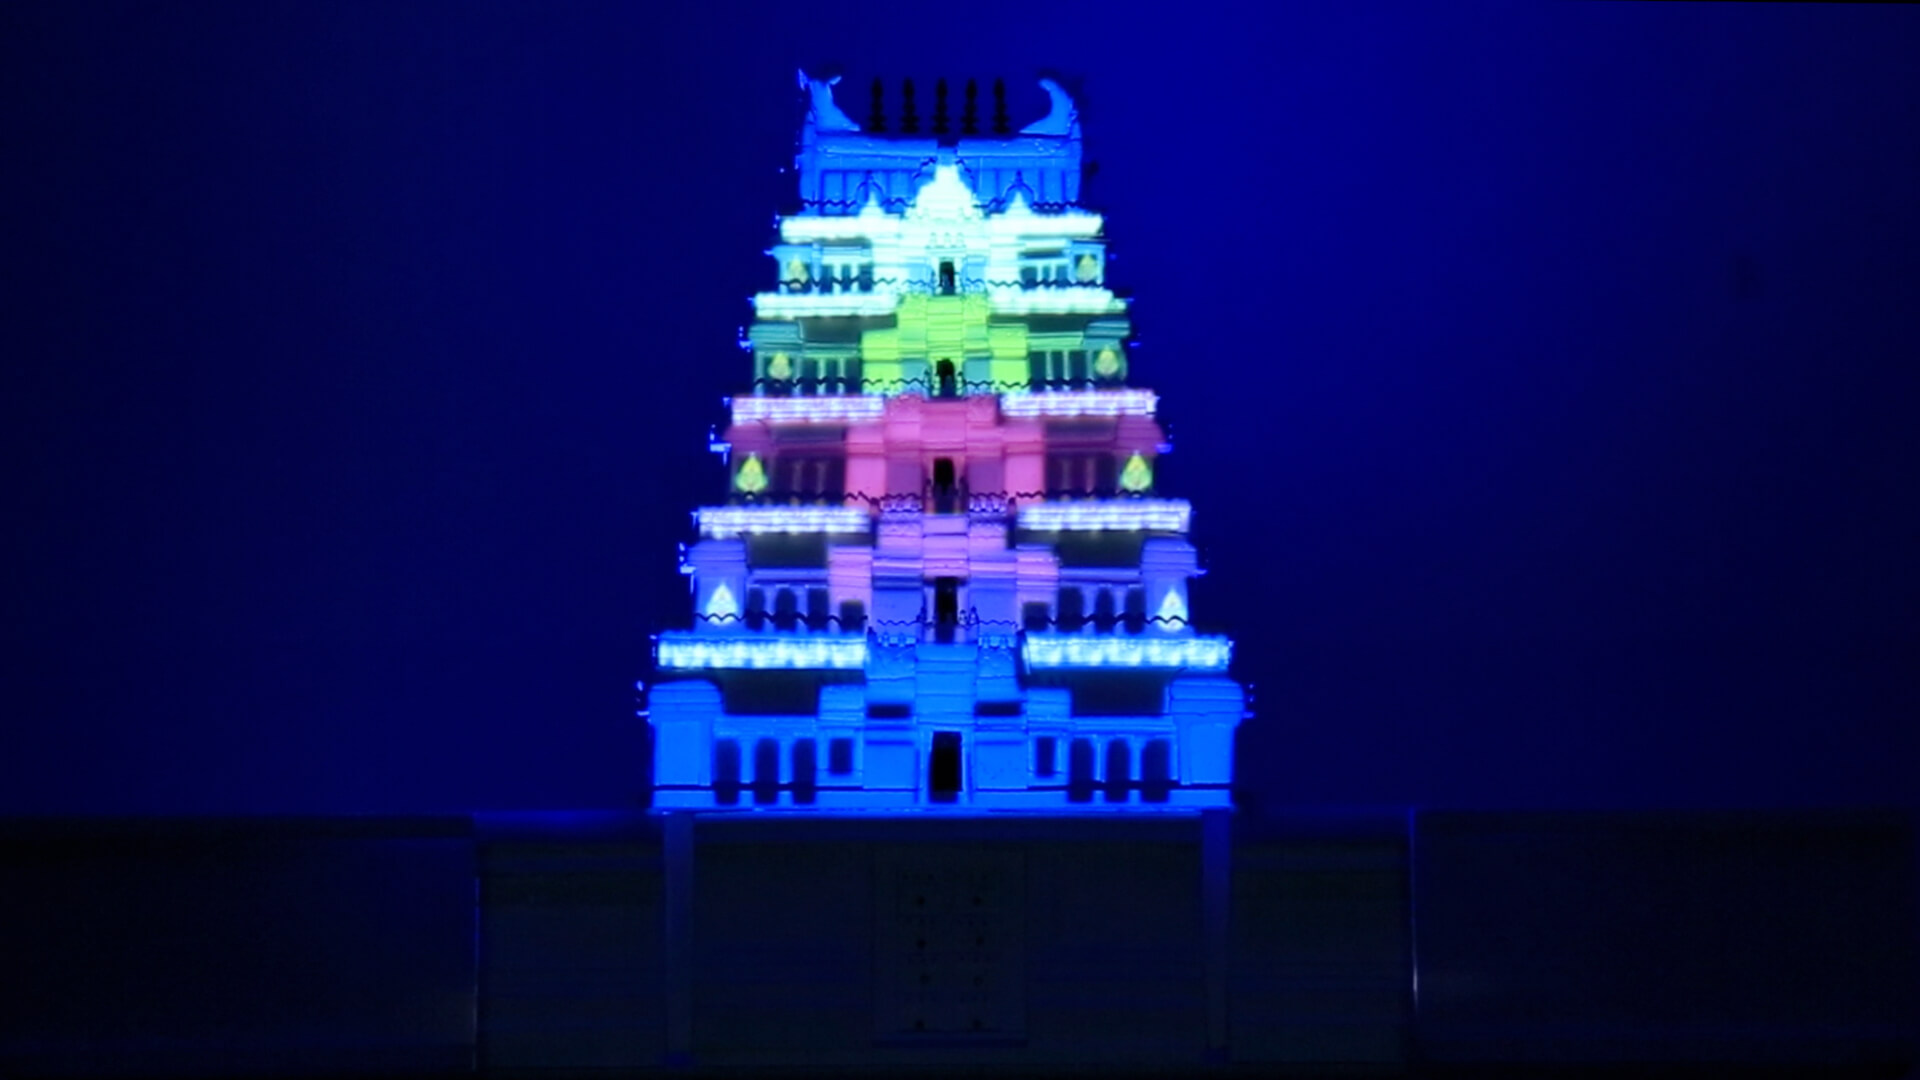 Temple projection mapping, video mapping, srushti, holographic projection